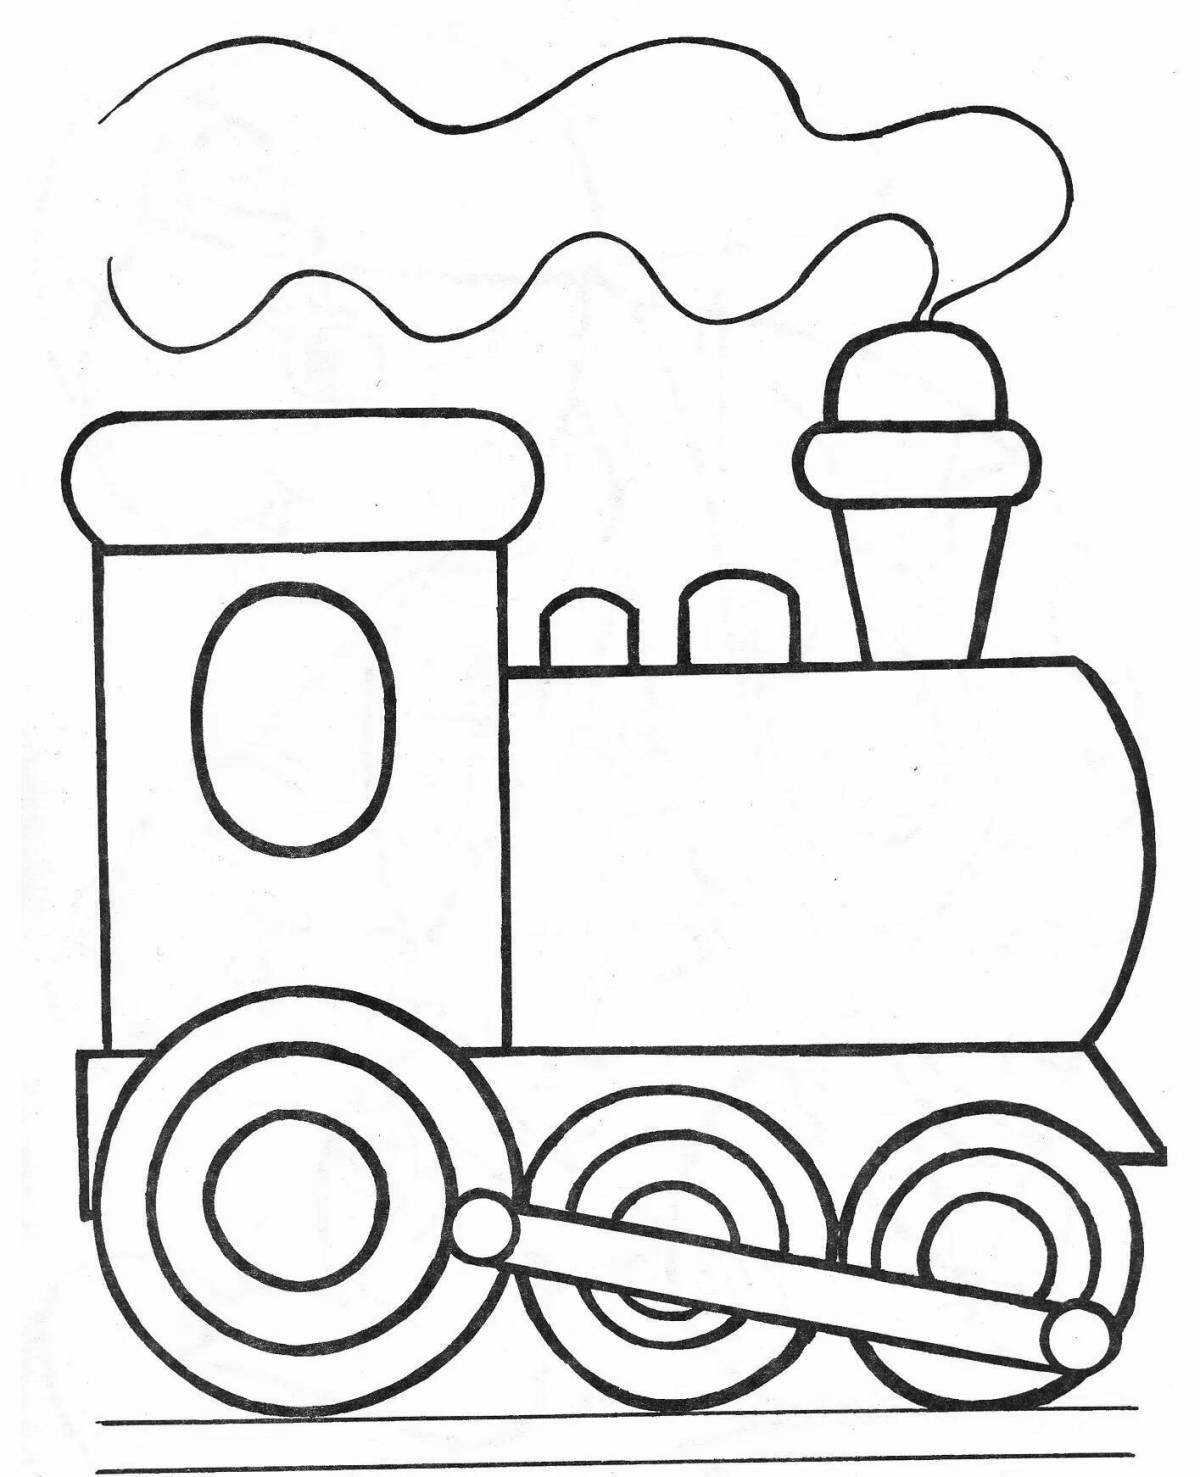 Fun coloring book for 3 year olds